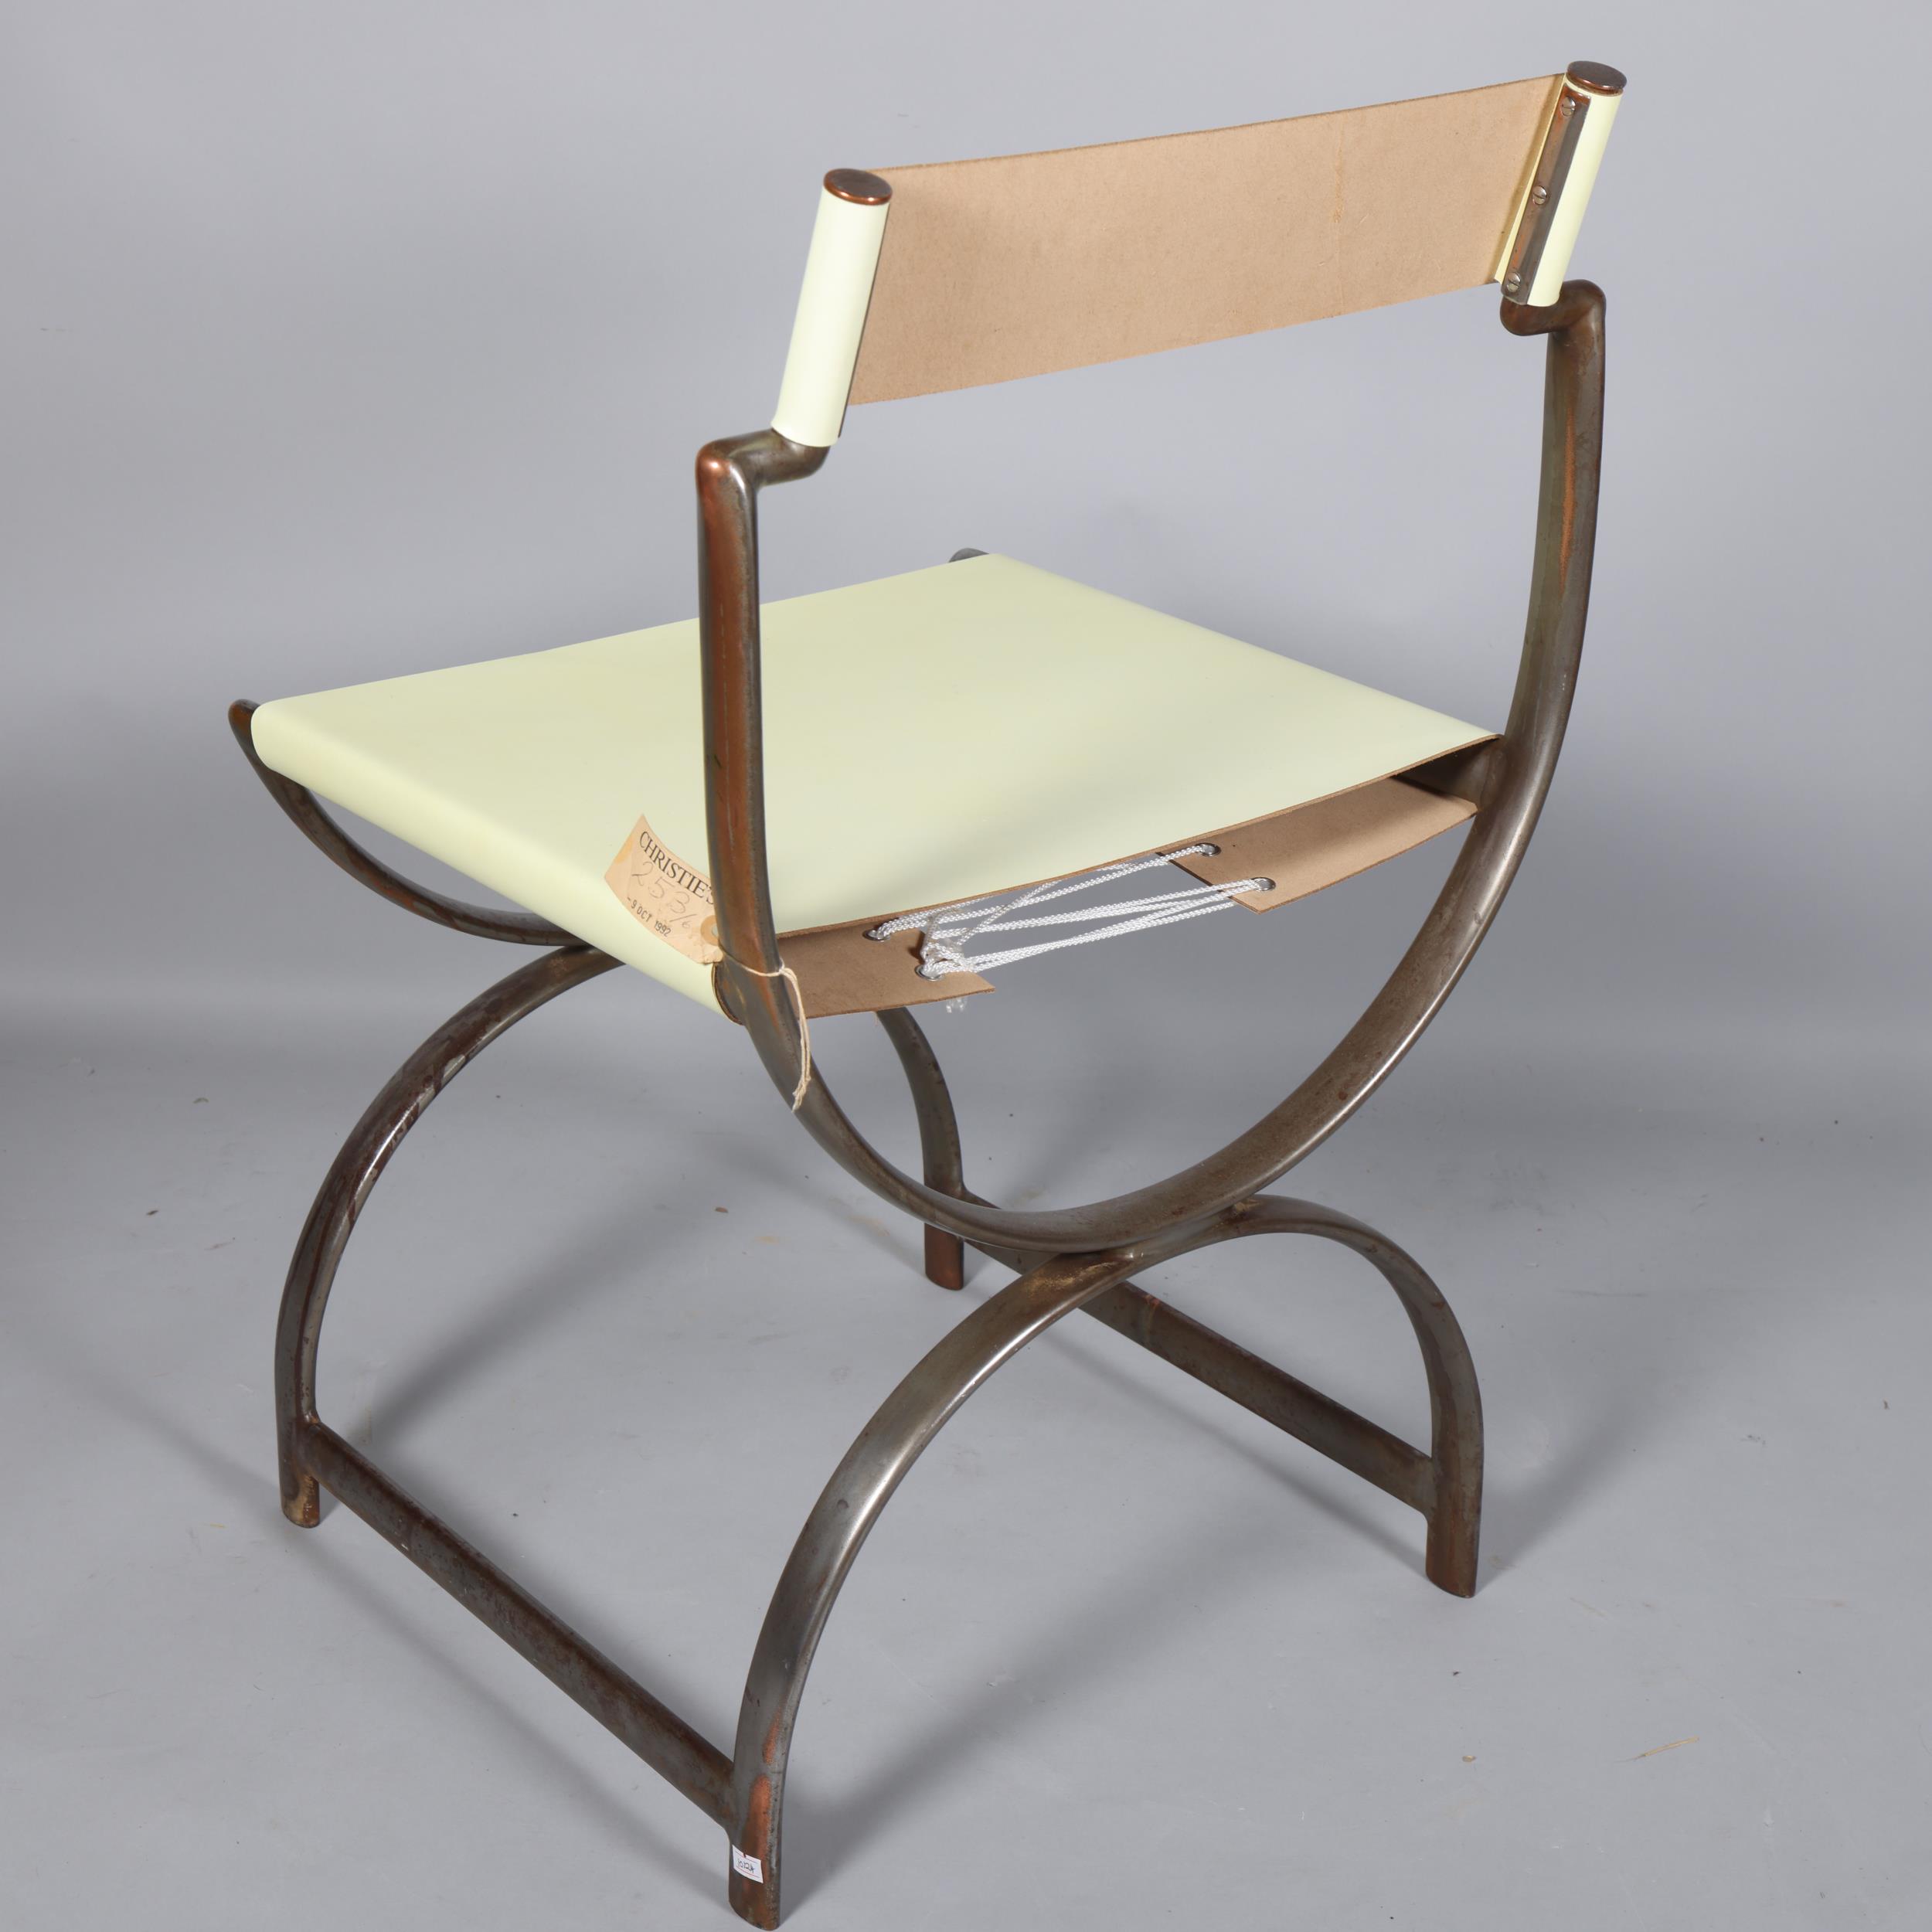 AMBROSE HEAL, a rare 1930s Art Deco or modernist curule chair in oval section tubular steel with - Image 2 of 3